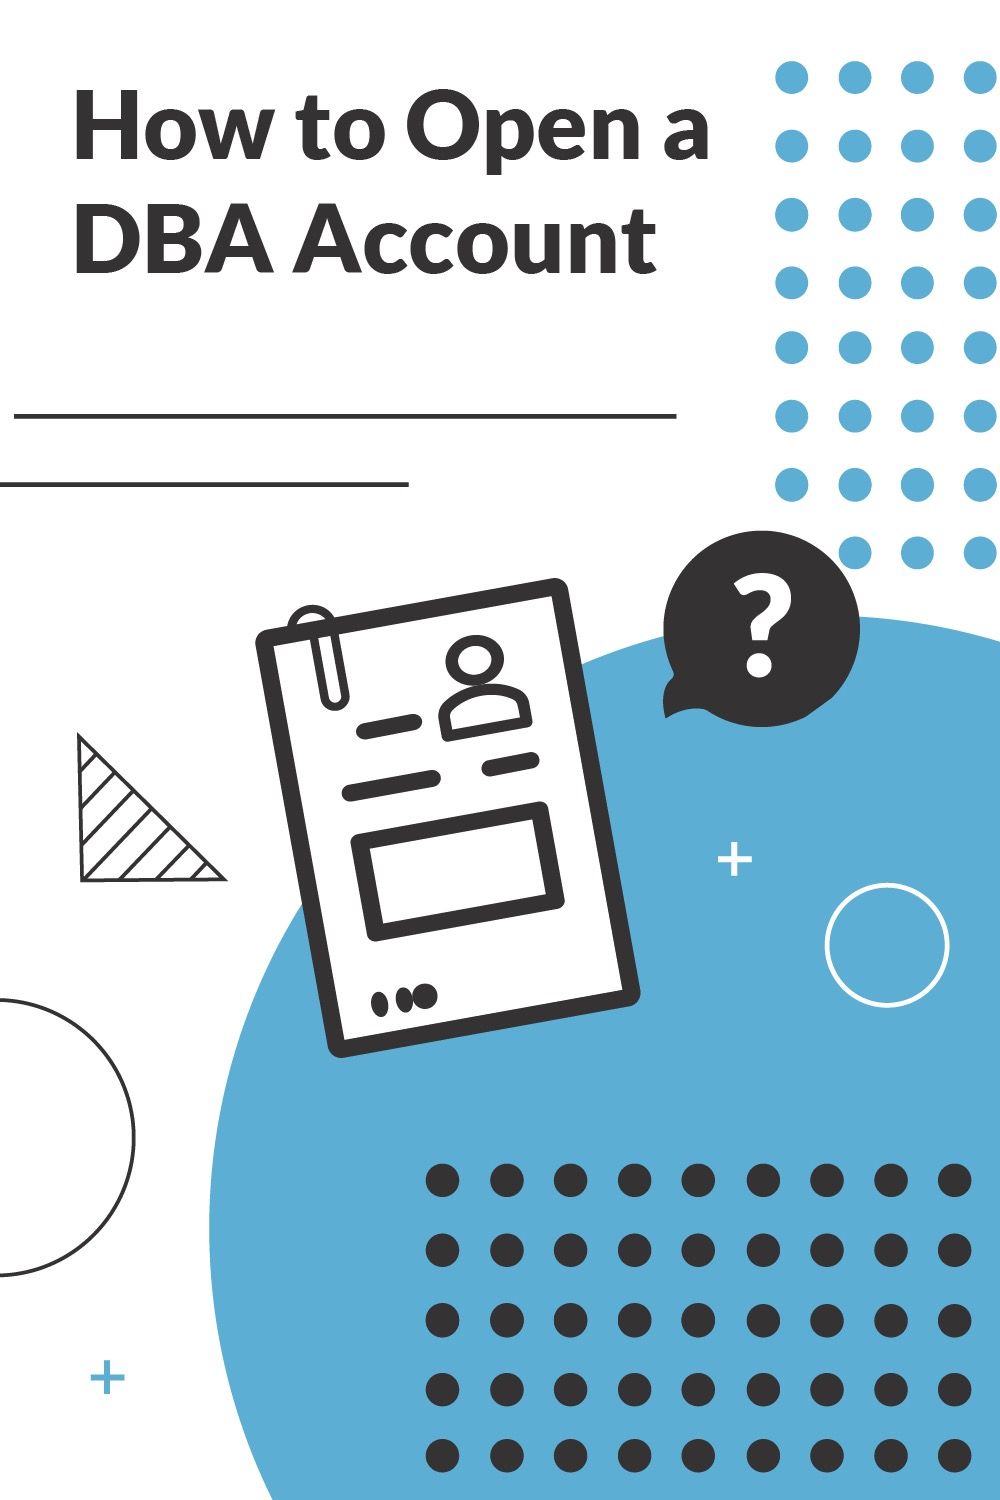 how to open a DBA account pinterest image